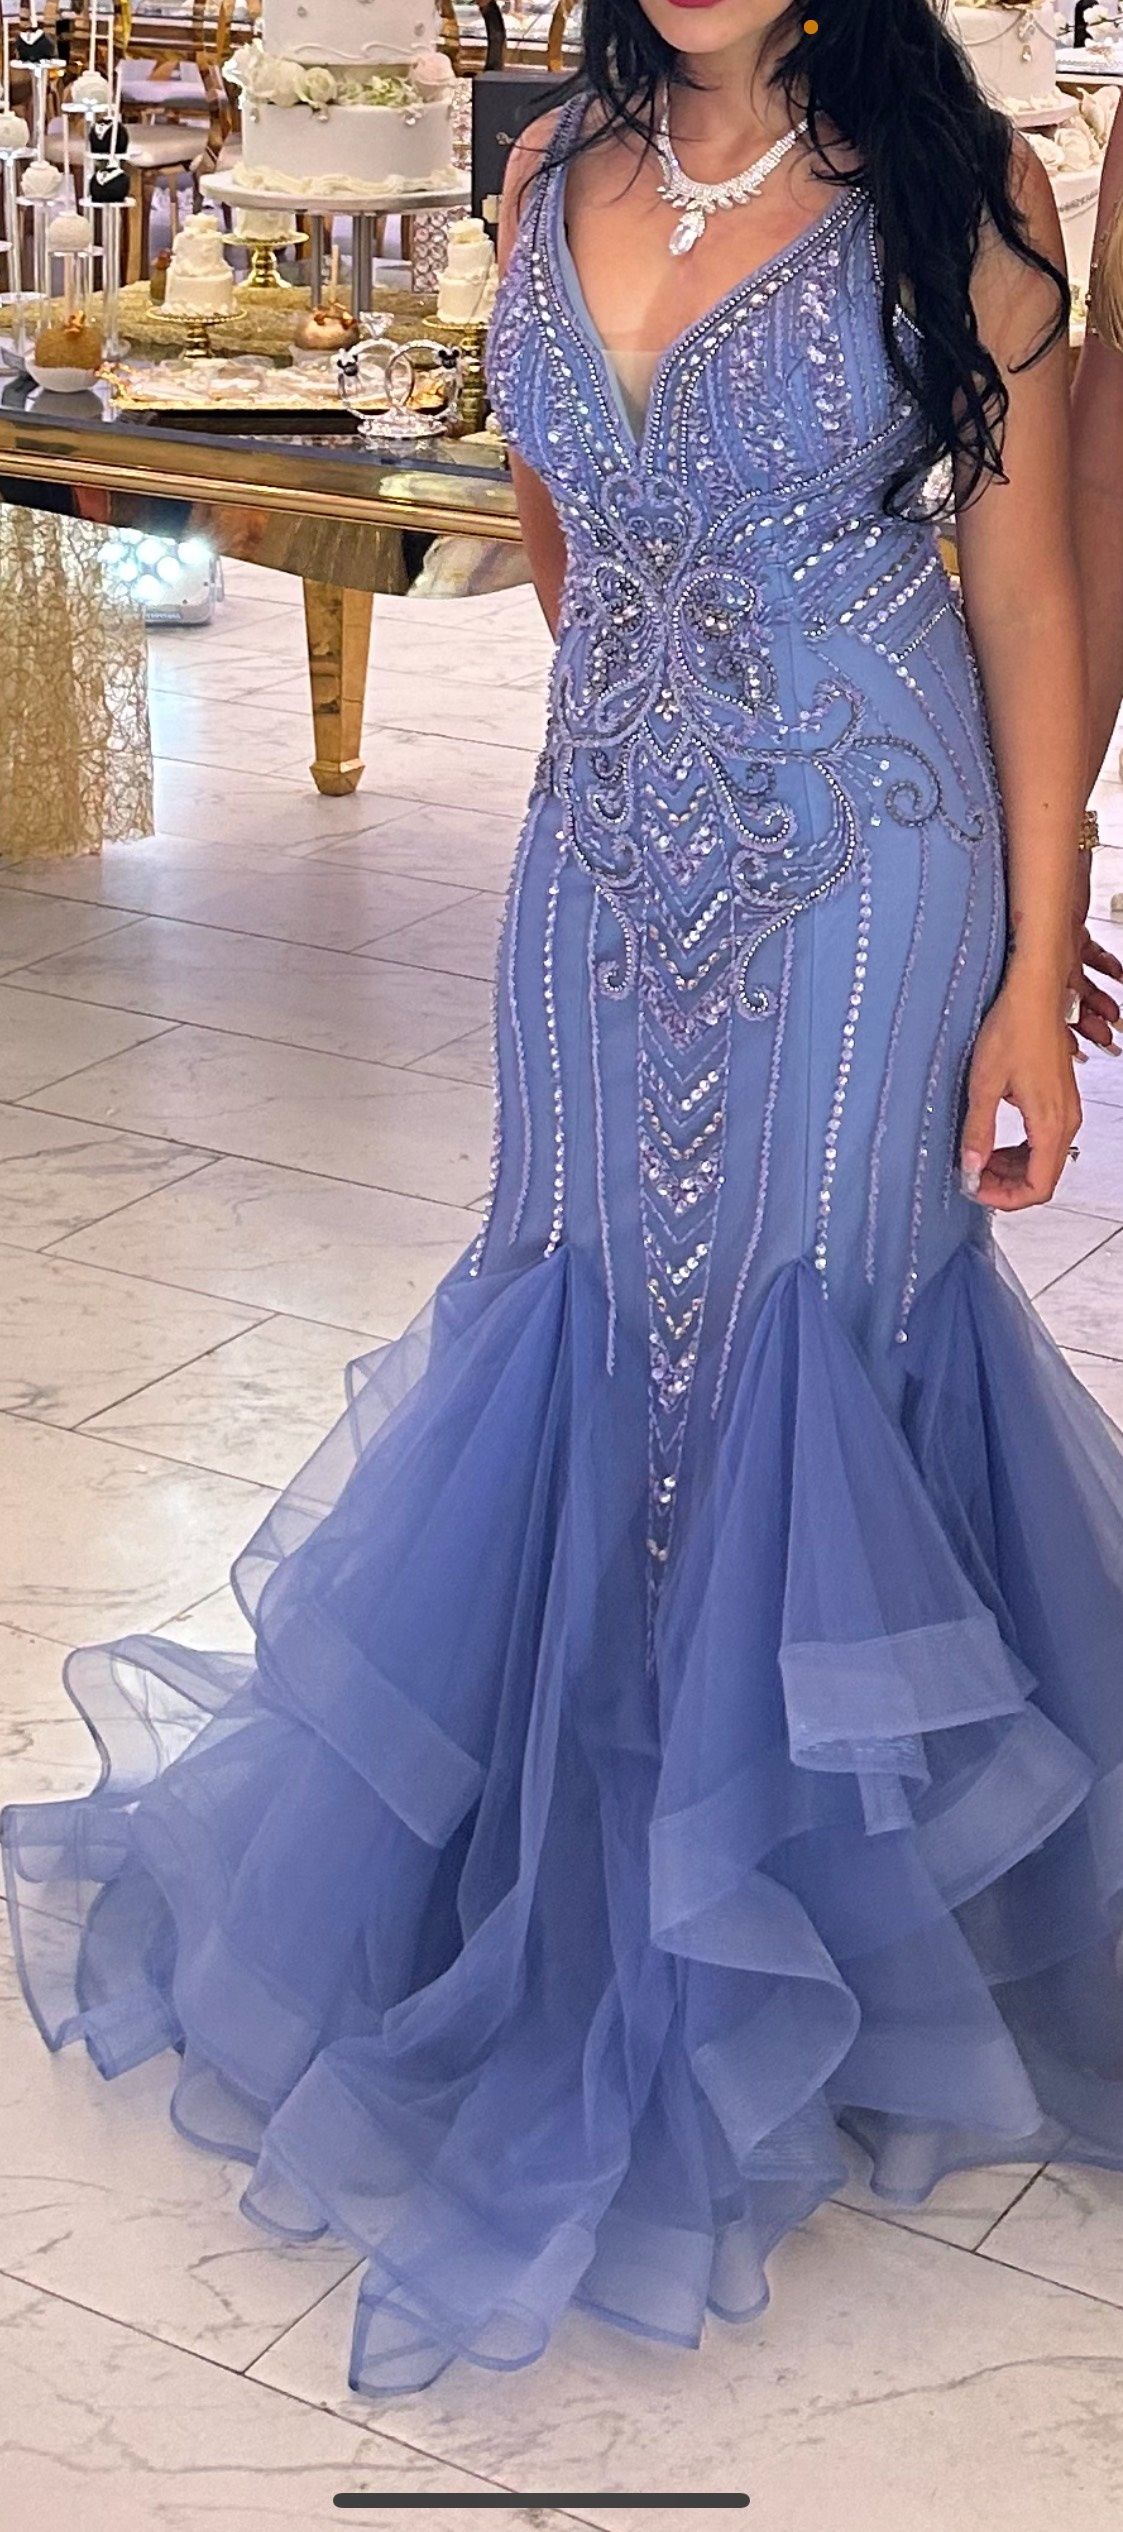 Lucci Lu Size 0 Prom Plunge Blue Mermaid Dress on Queenly